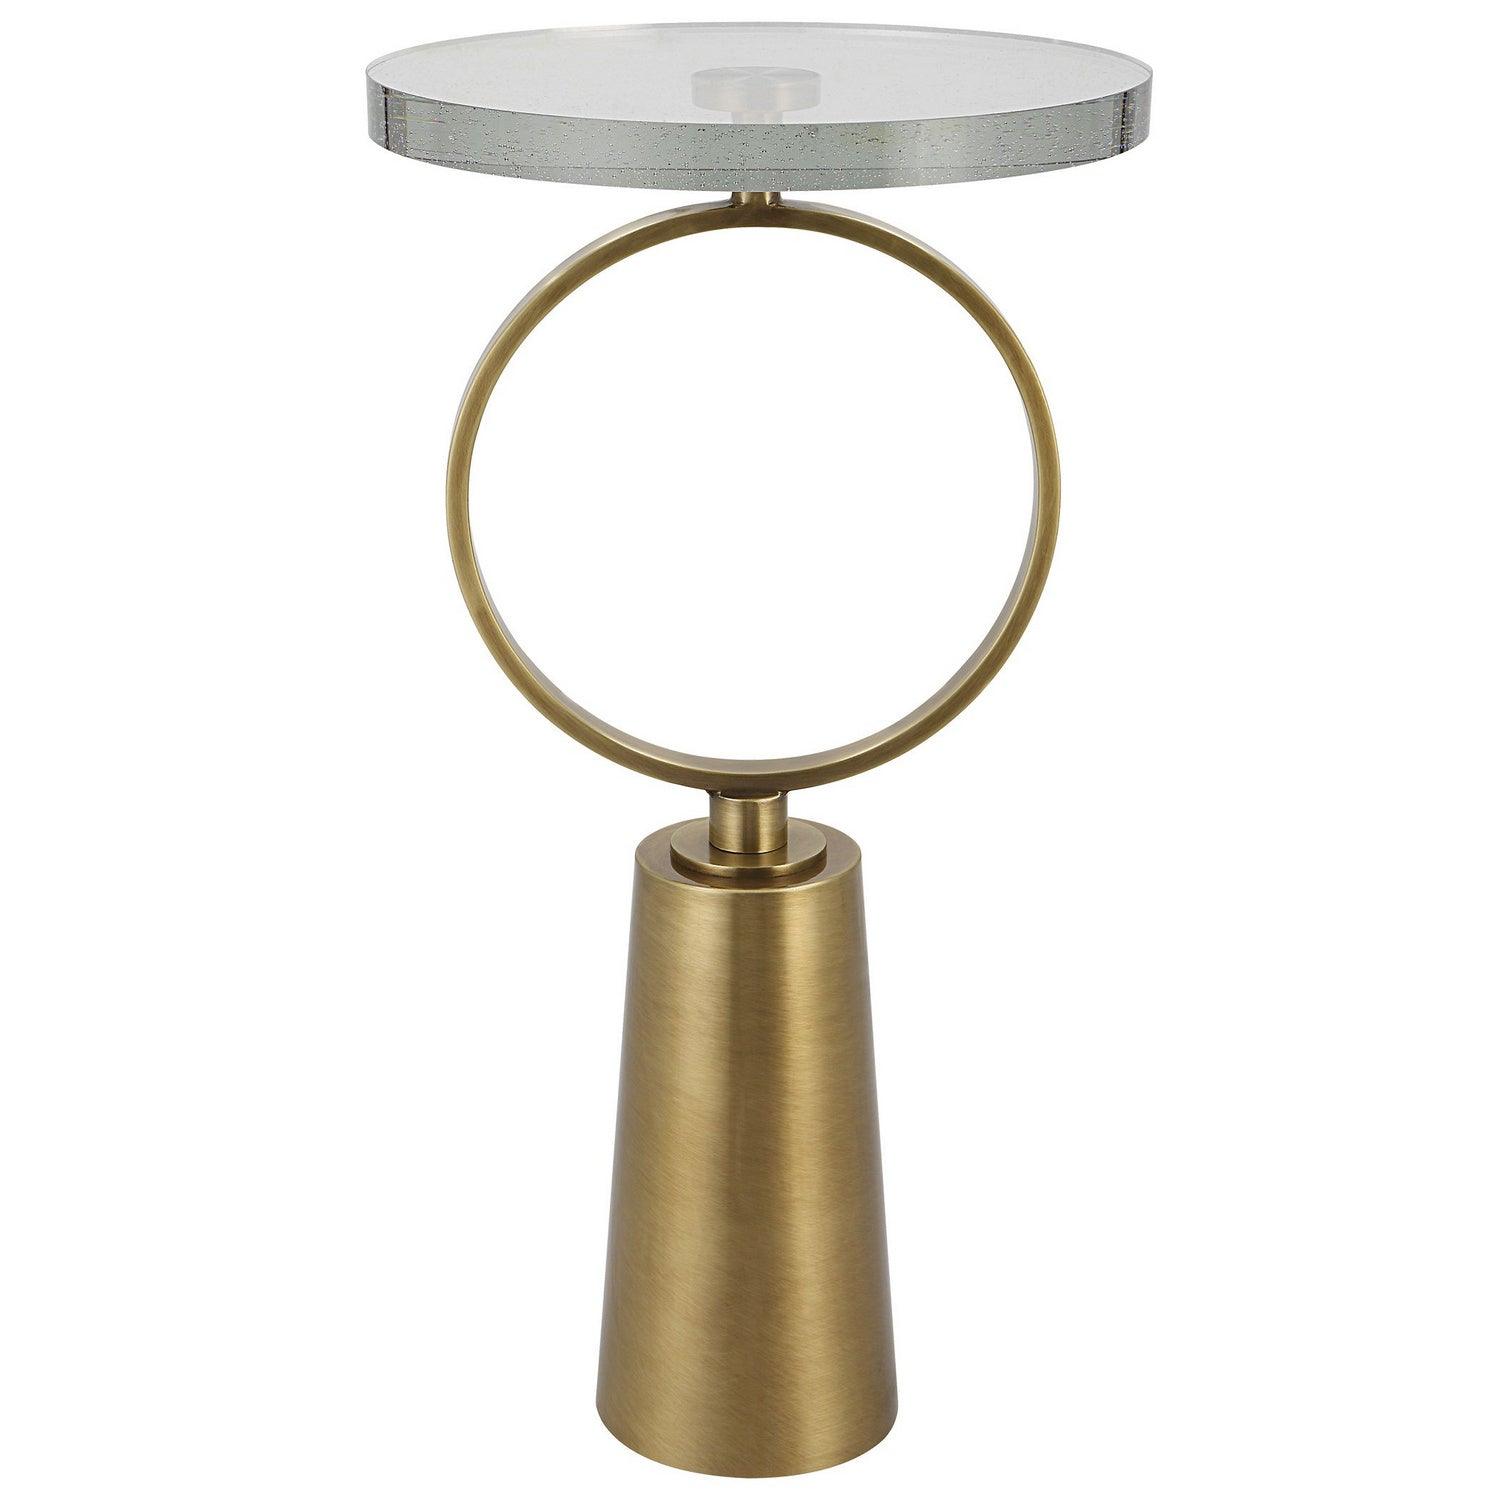 The Uttermost - Ringlet Accent Table - 25178 | Montreal Lighting & Hardware